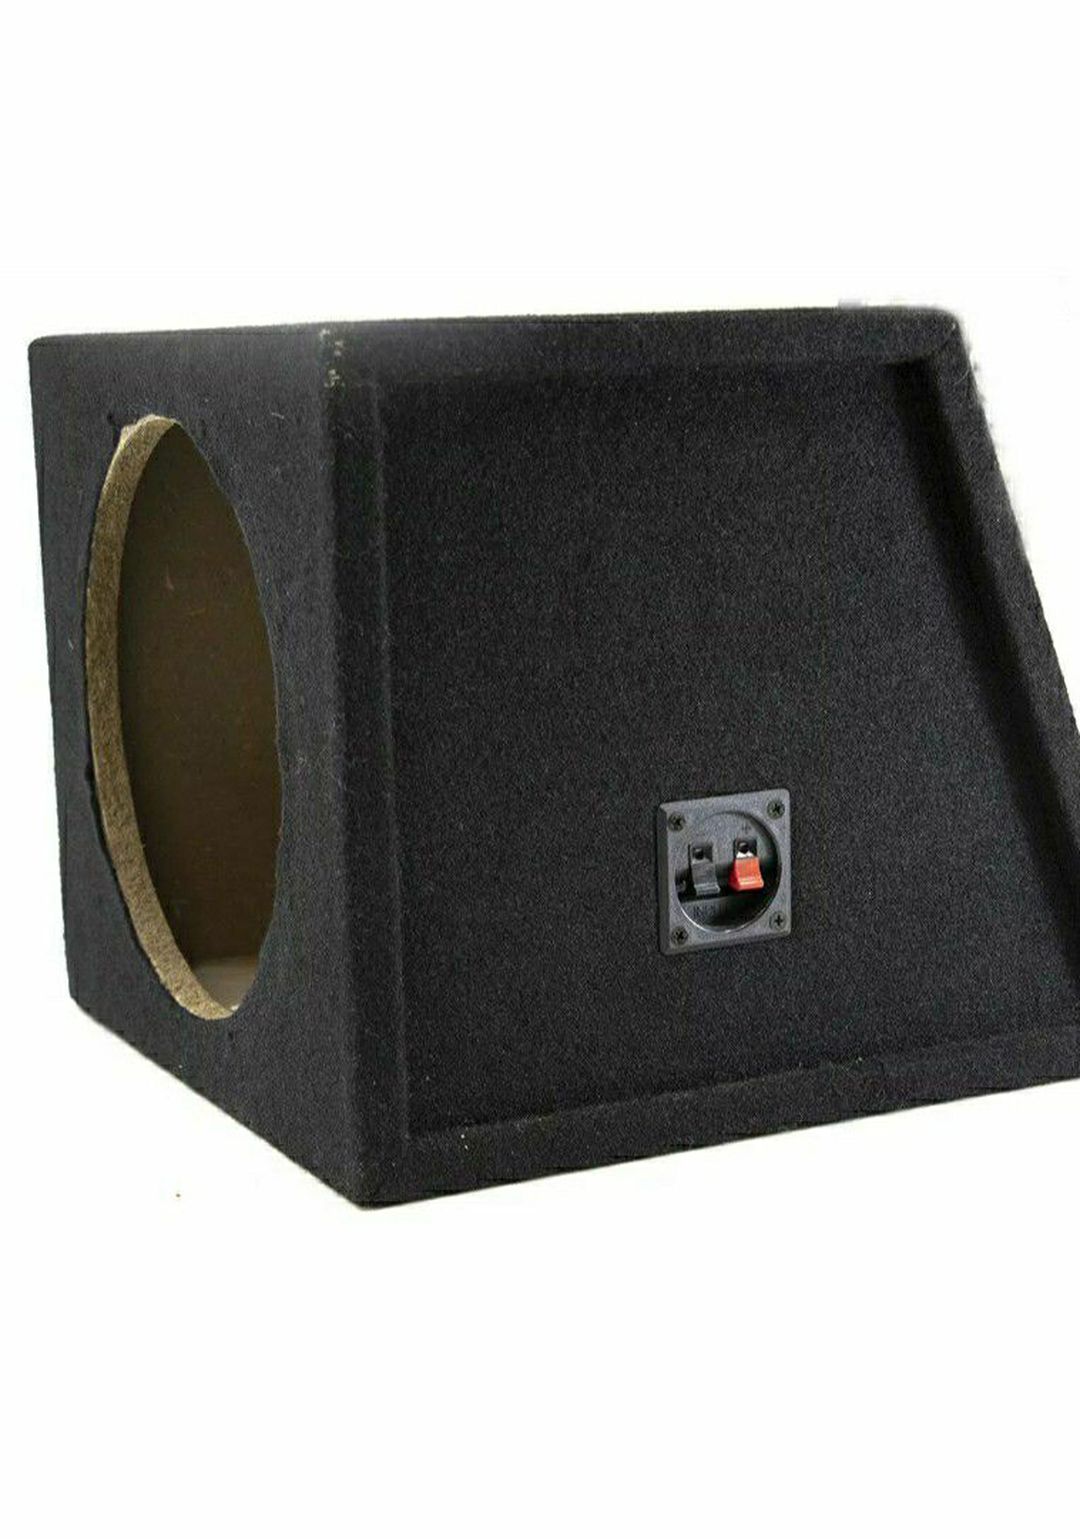 10" Single Sealed Subwoofer Enclosure Box By Metra